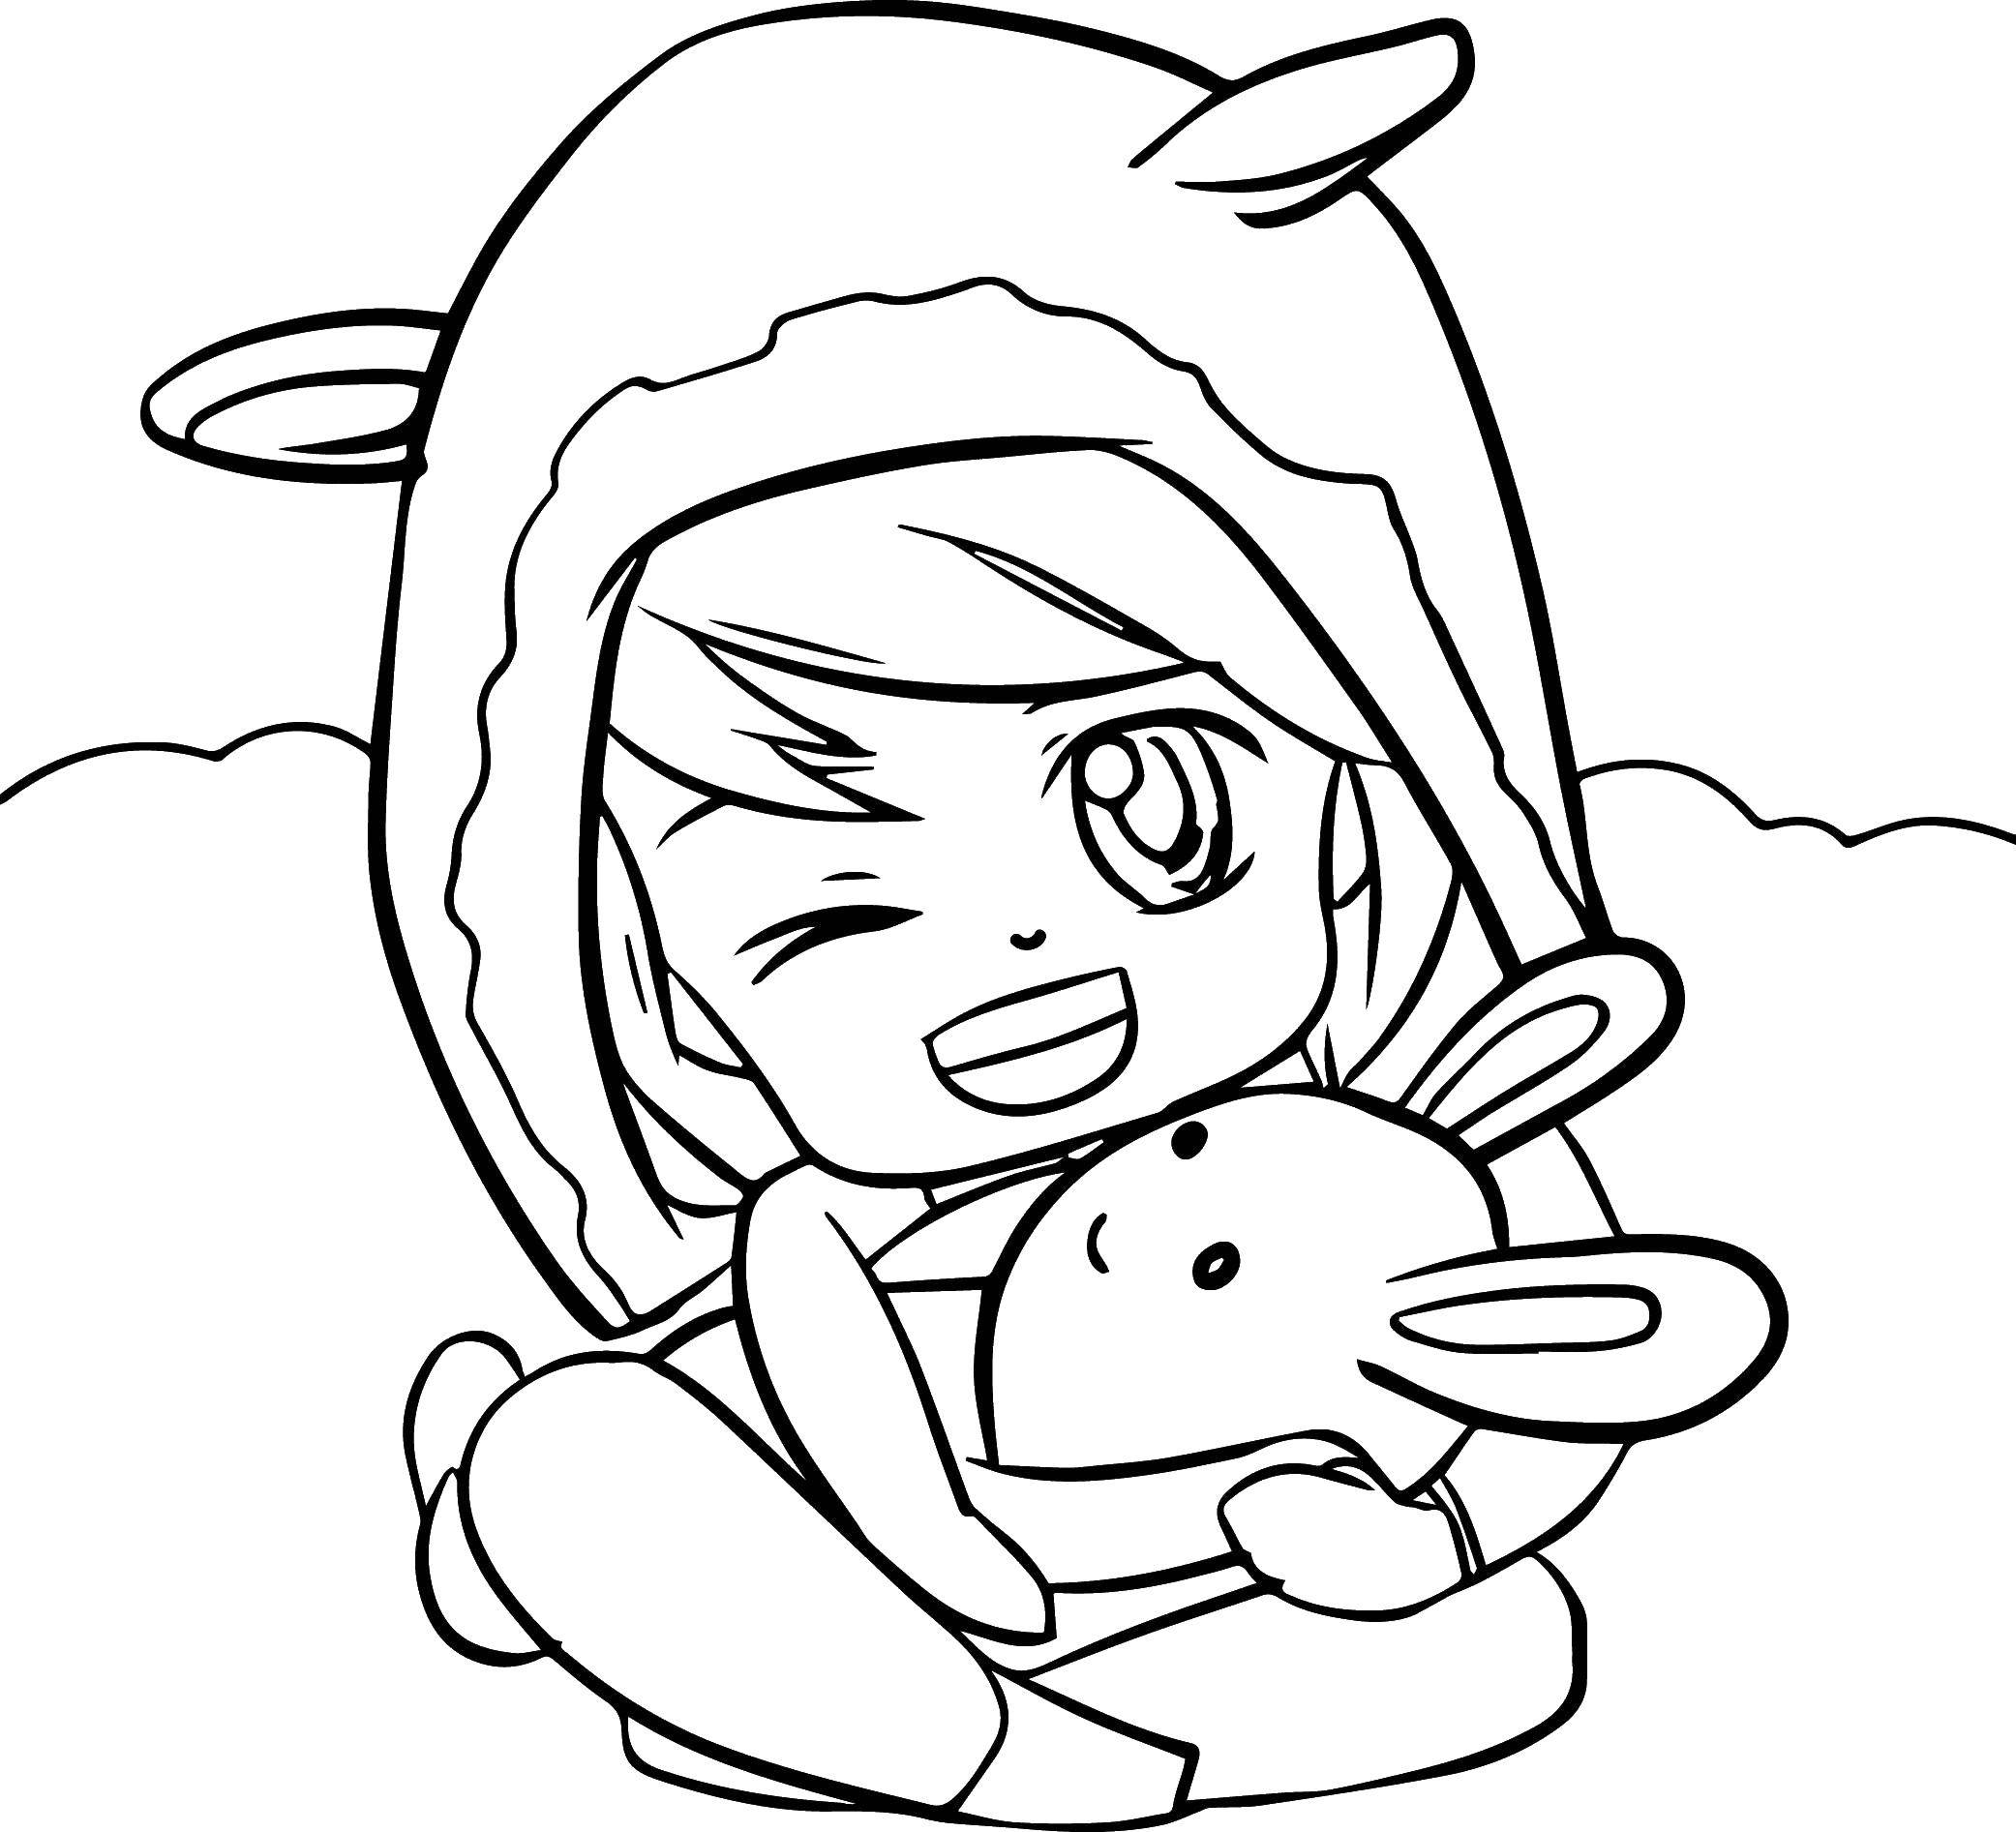 Convert Photo to Coloring Page Online - Mimi Panda